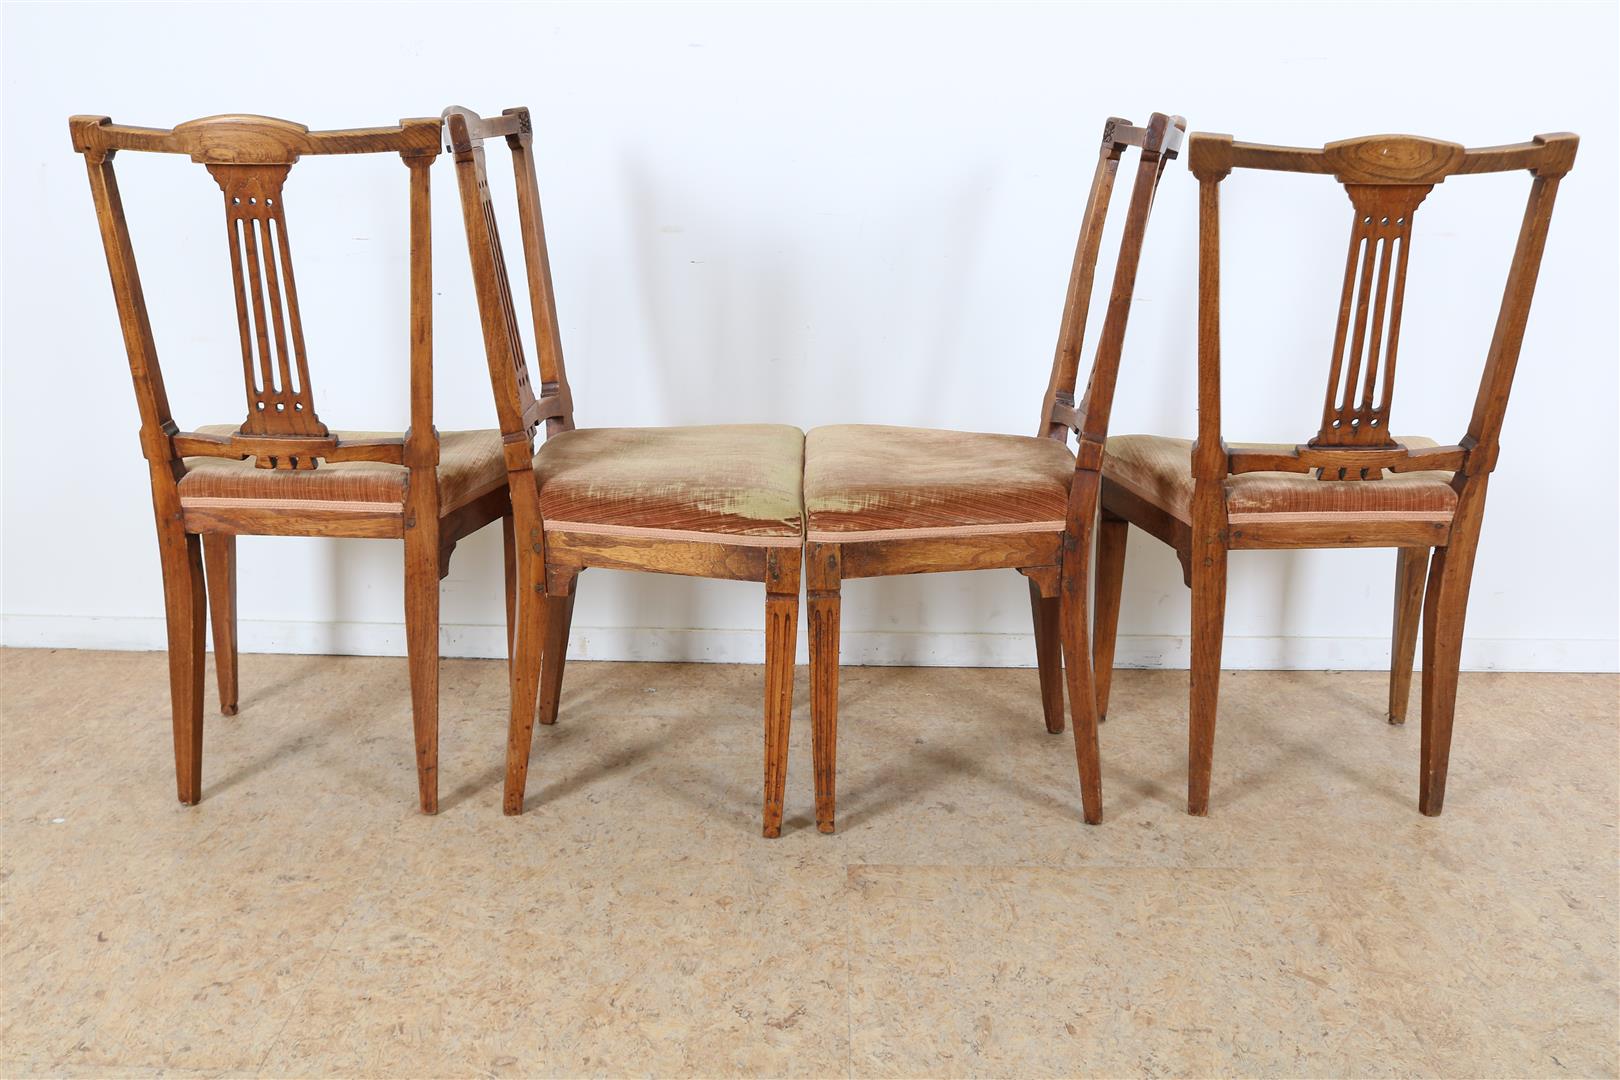 Series of 6 elm wood chairs with elaborate backrest and various green velvet seats, ca. 1800. ( - Image 6 of 6